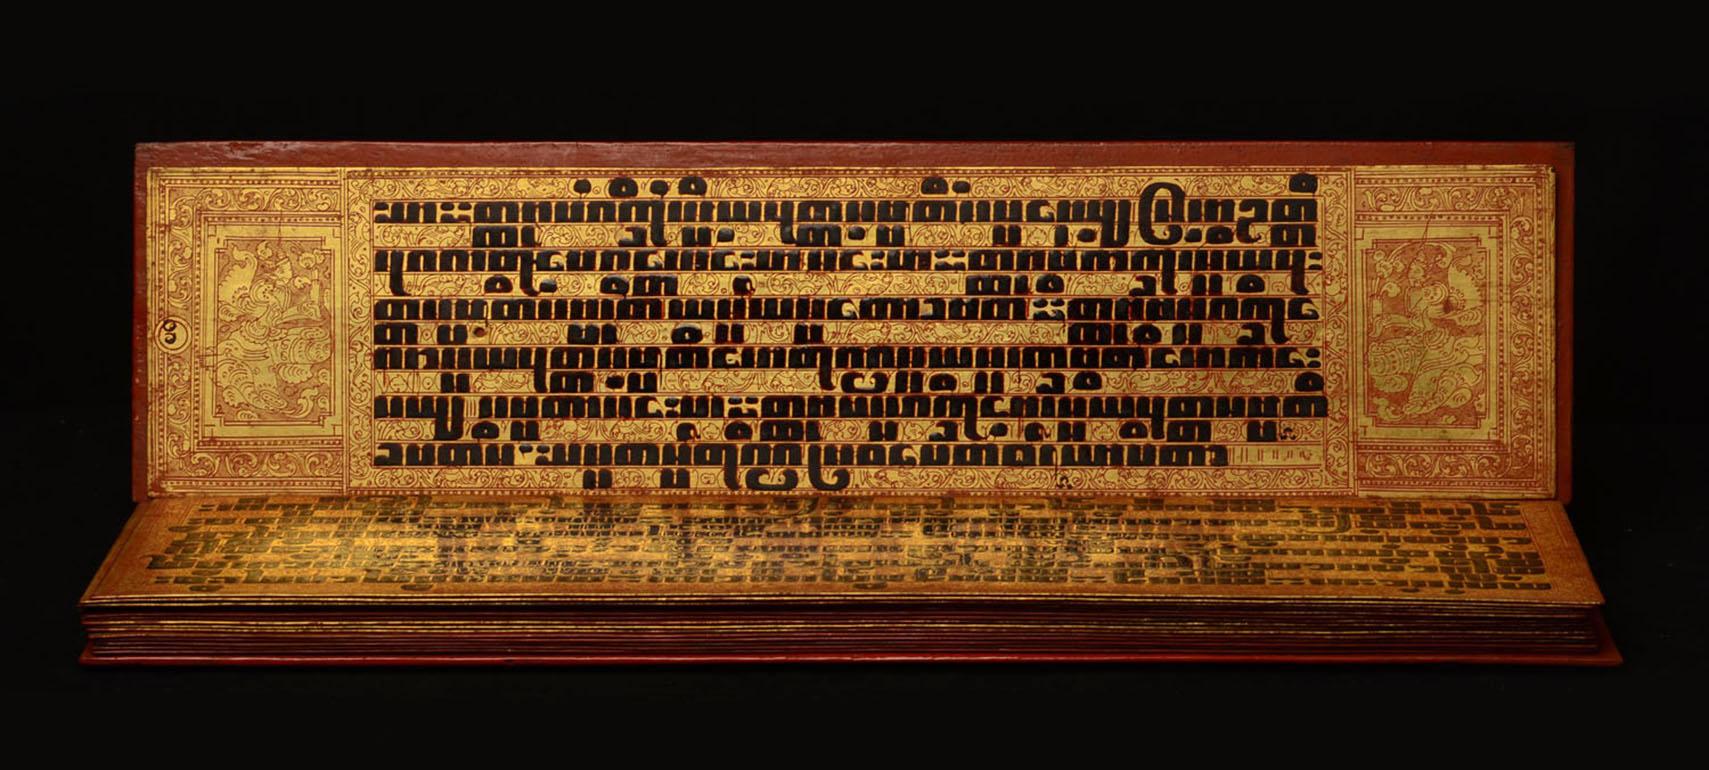 Rare and complete set Burmese manuscript (KAMMAVACA) made from thick cloth coated with gold and lacquer in nice condition. It was written in the Pali language using Burmese script. The square letters were written in thick and black cinnabar lacquer.